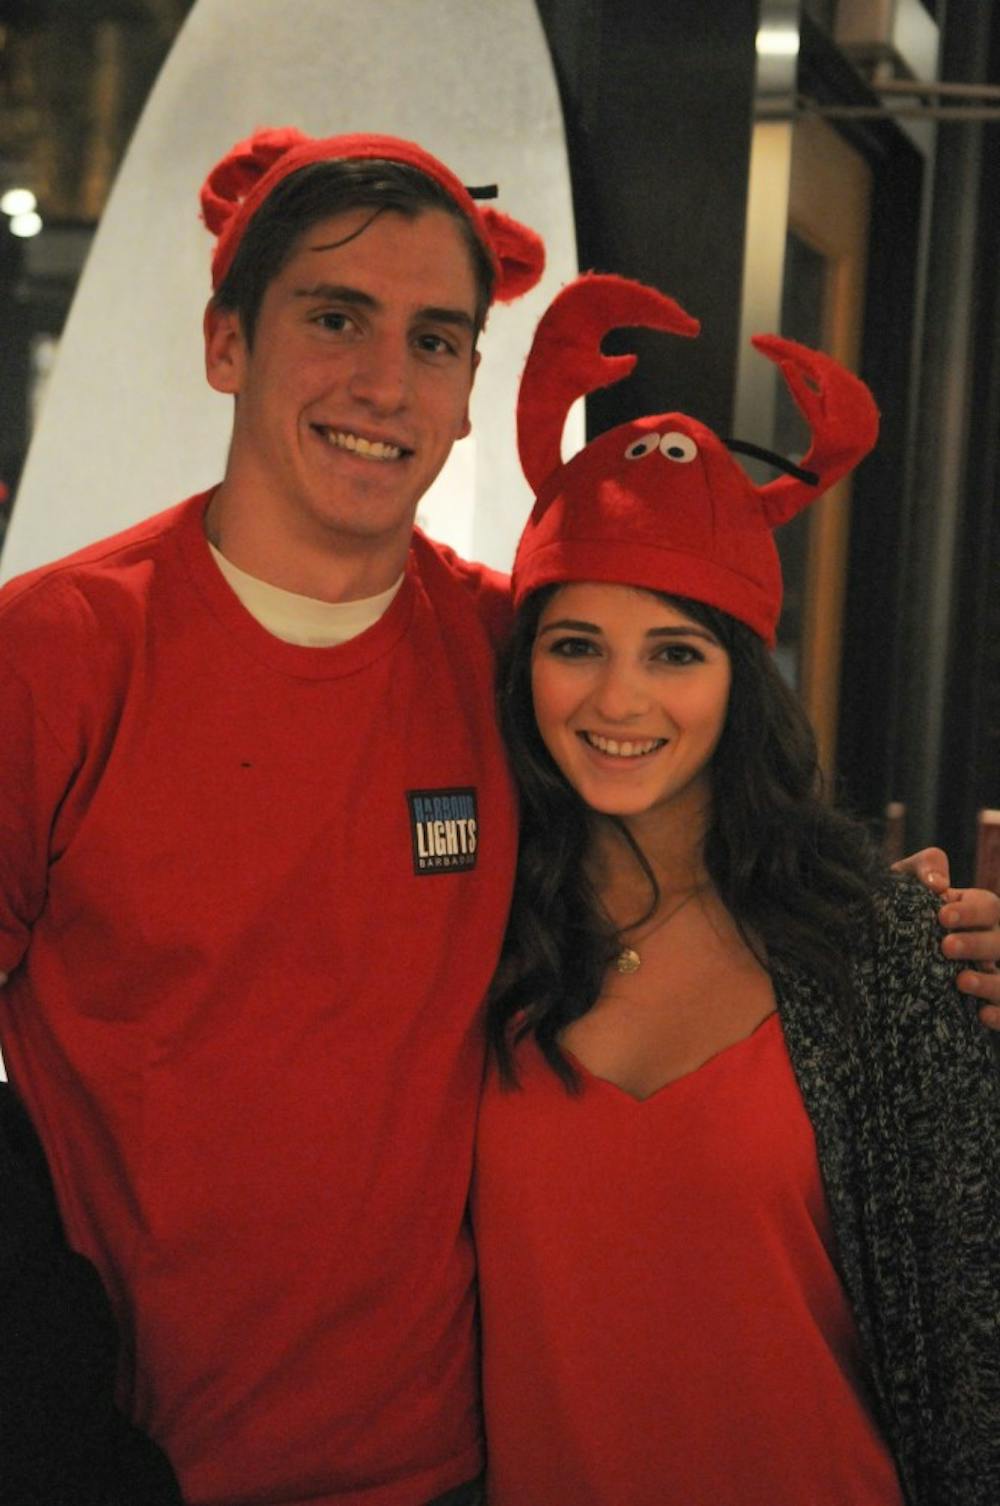 As lobsters, we are pumped for our $3 Chipotle burritos! Also pumped for endless candy.